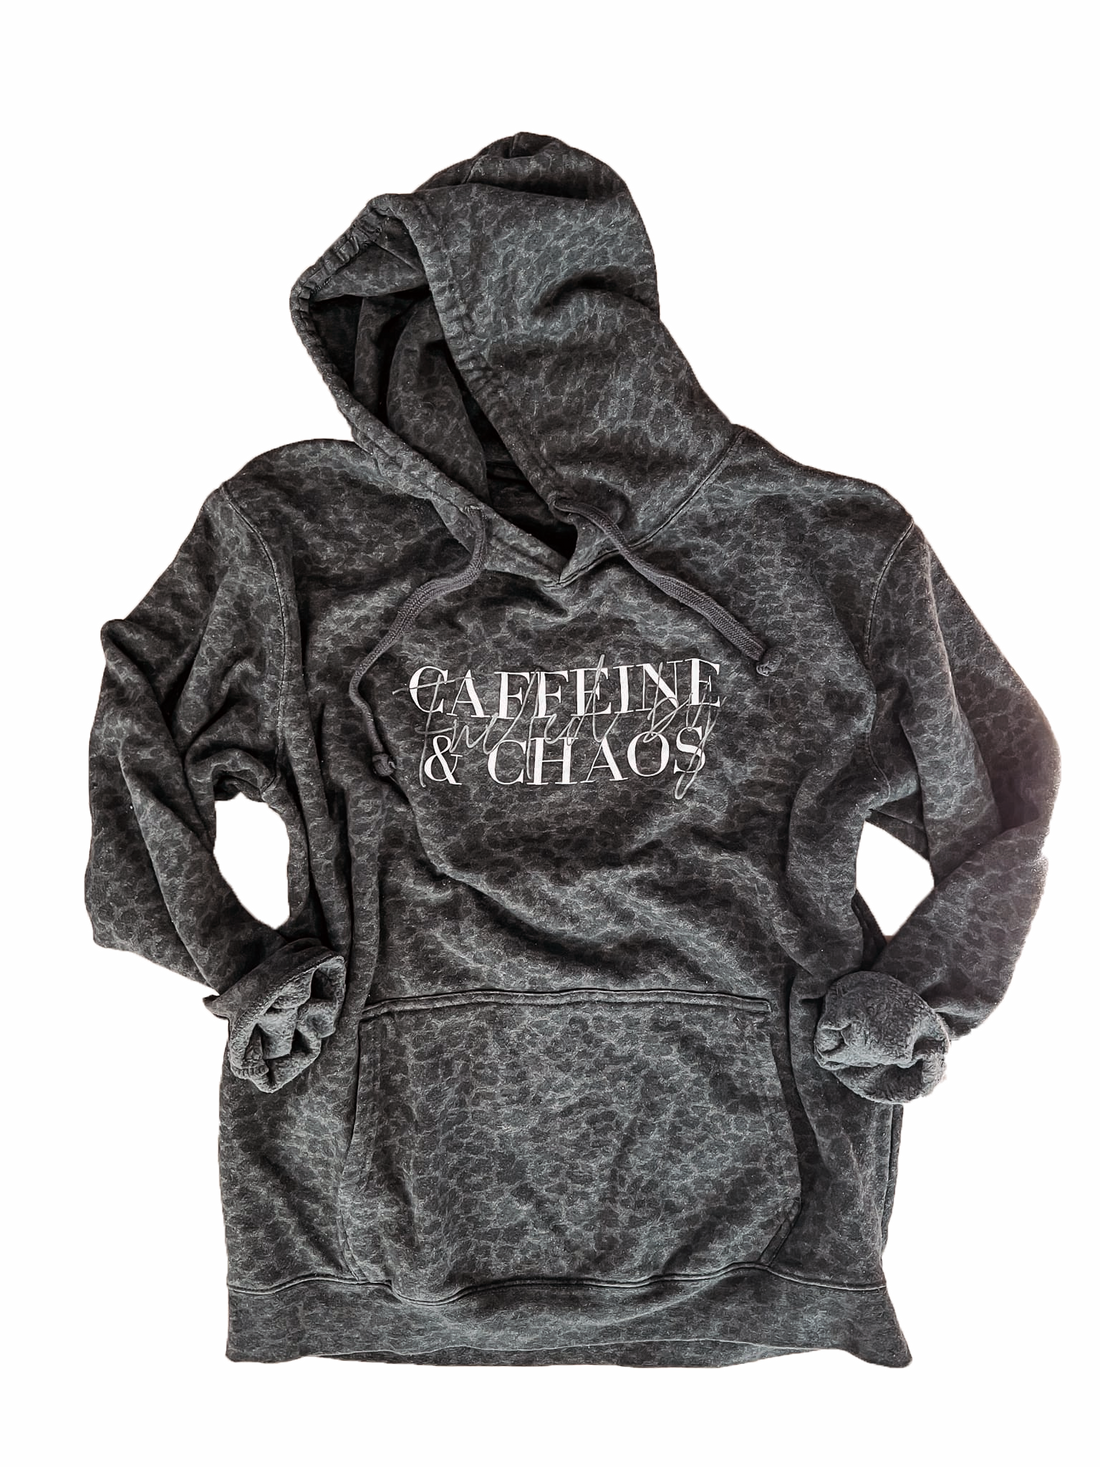 PREORDER: Fueled by Caffeine & Chaos - Black Leopard Hoodie